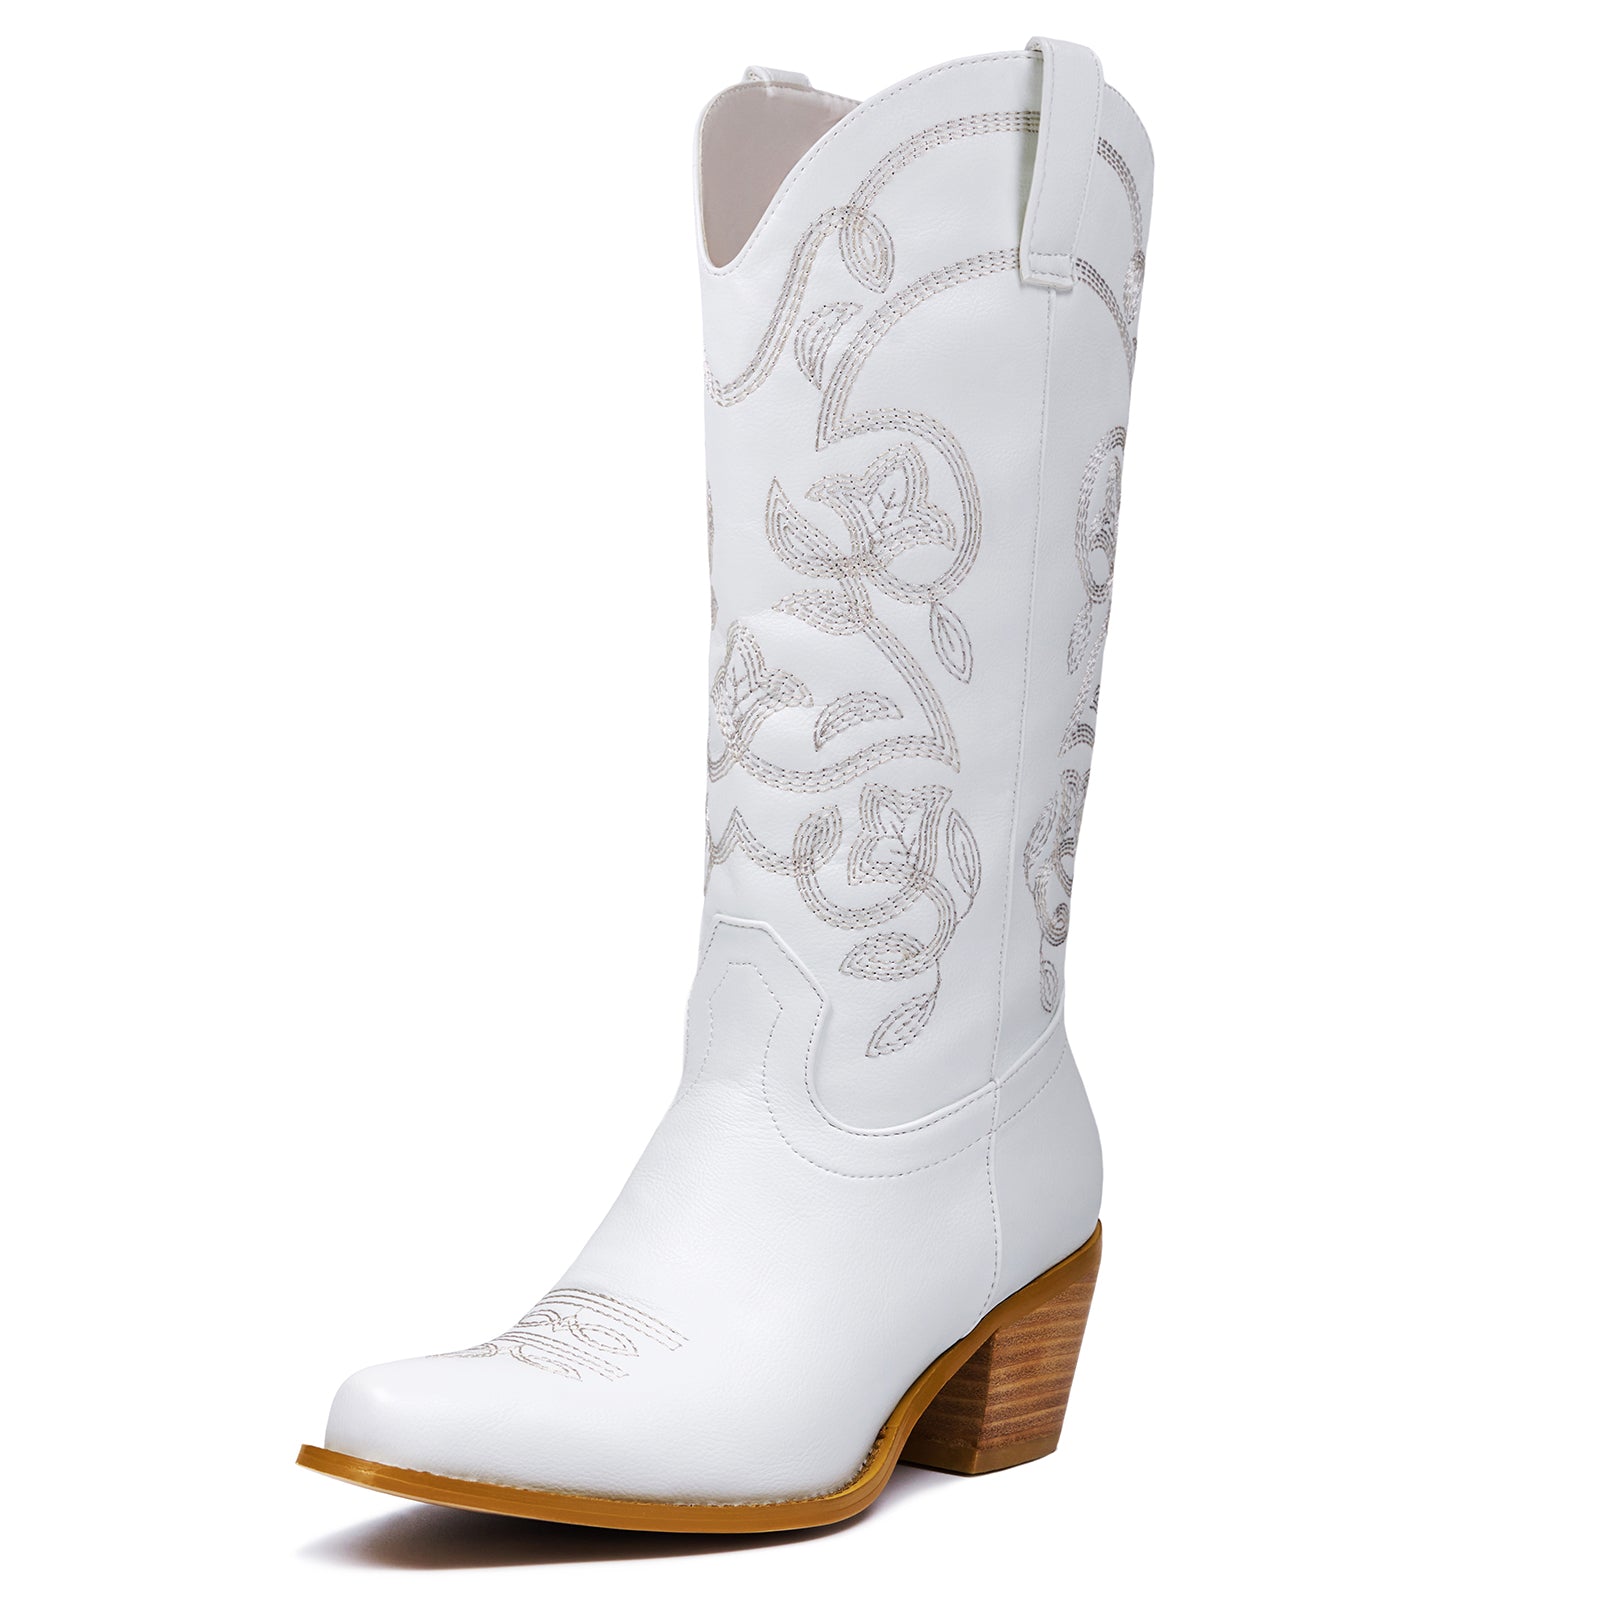 Vintage Embroidered Mid Calf Cowboy Boots